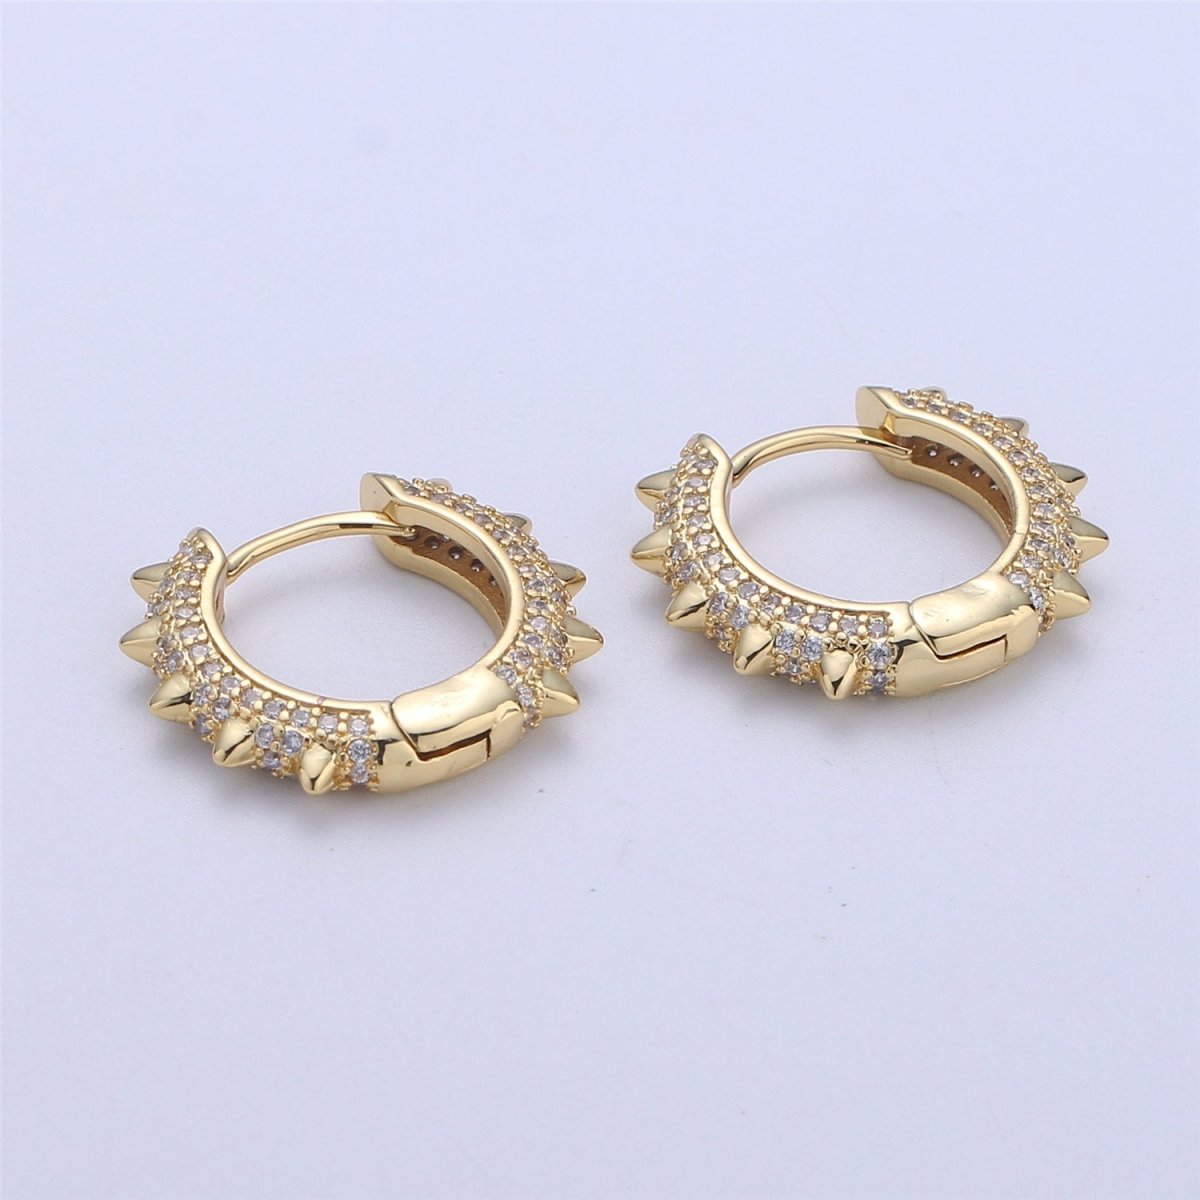 Spike earrings Micro Pave Spike hoops Gold spike earrings Multi Color CZ Gold hoops Dainty Earring for everyday earring 20mm K-331 - DLUXCA